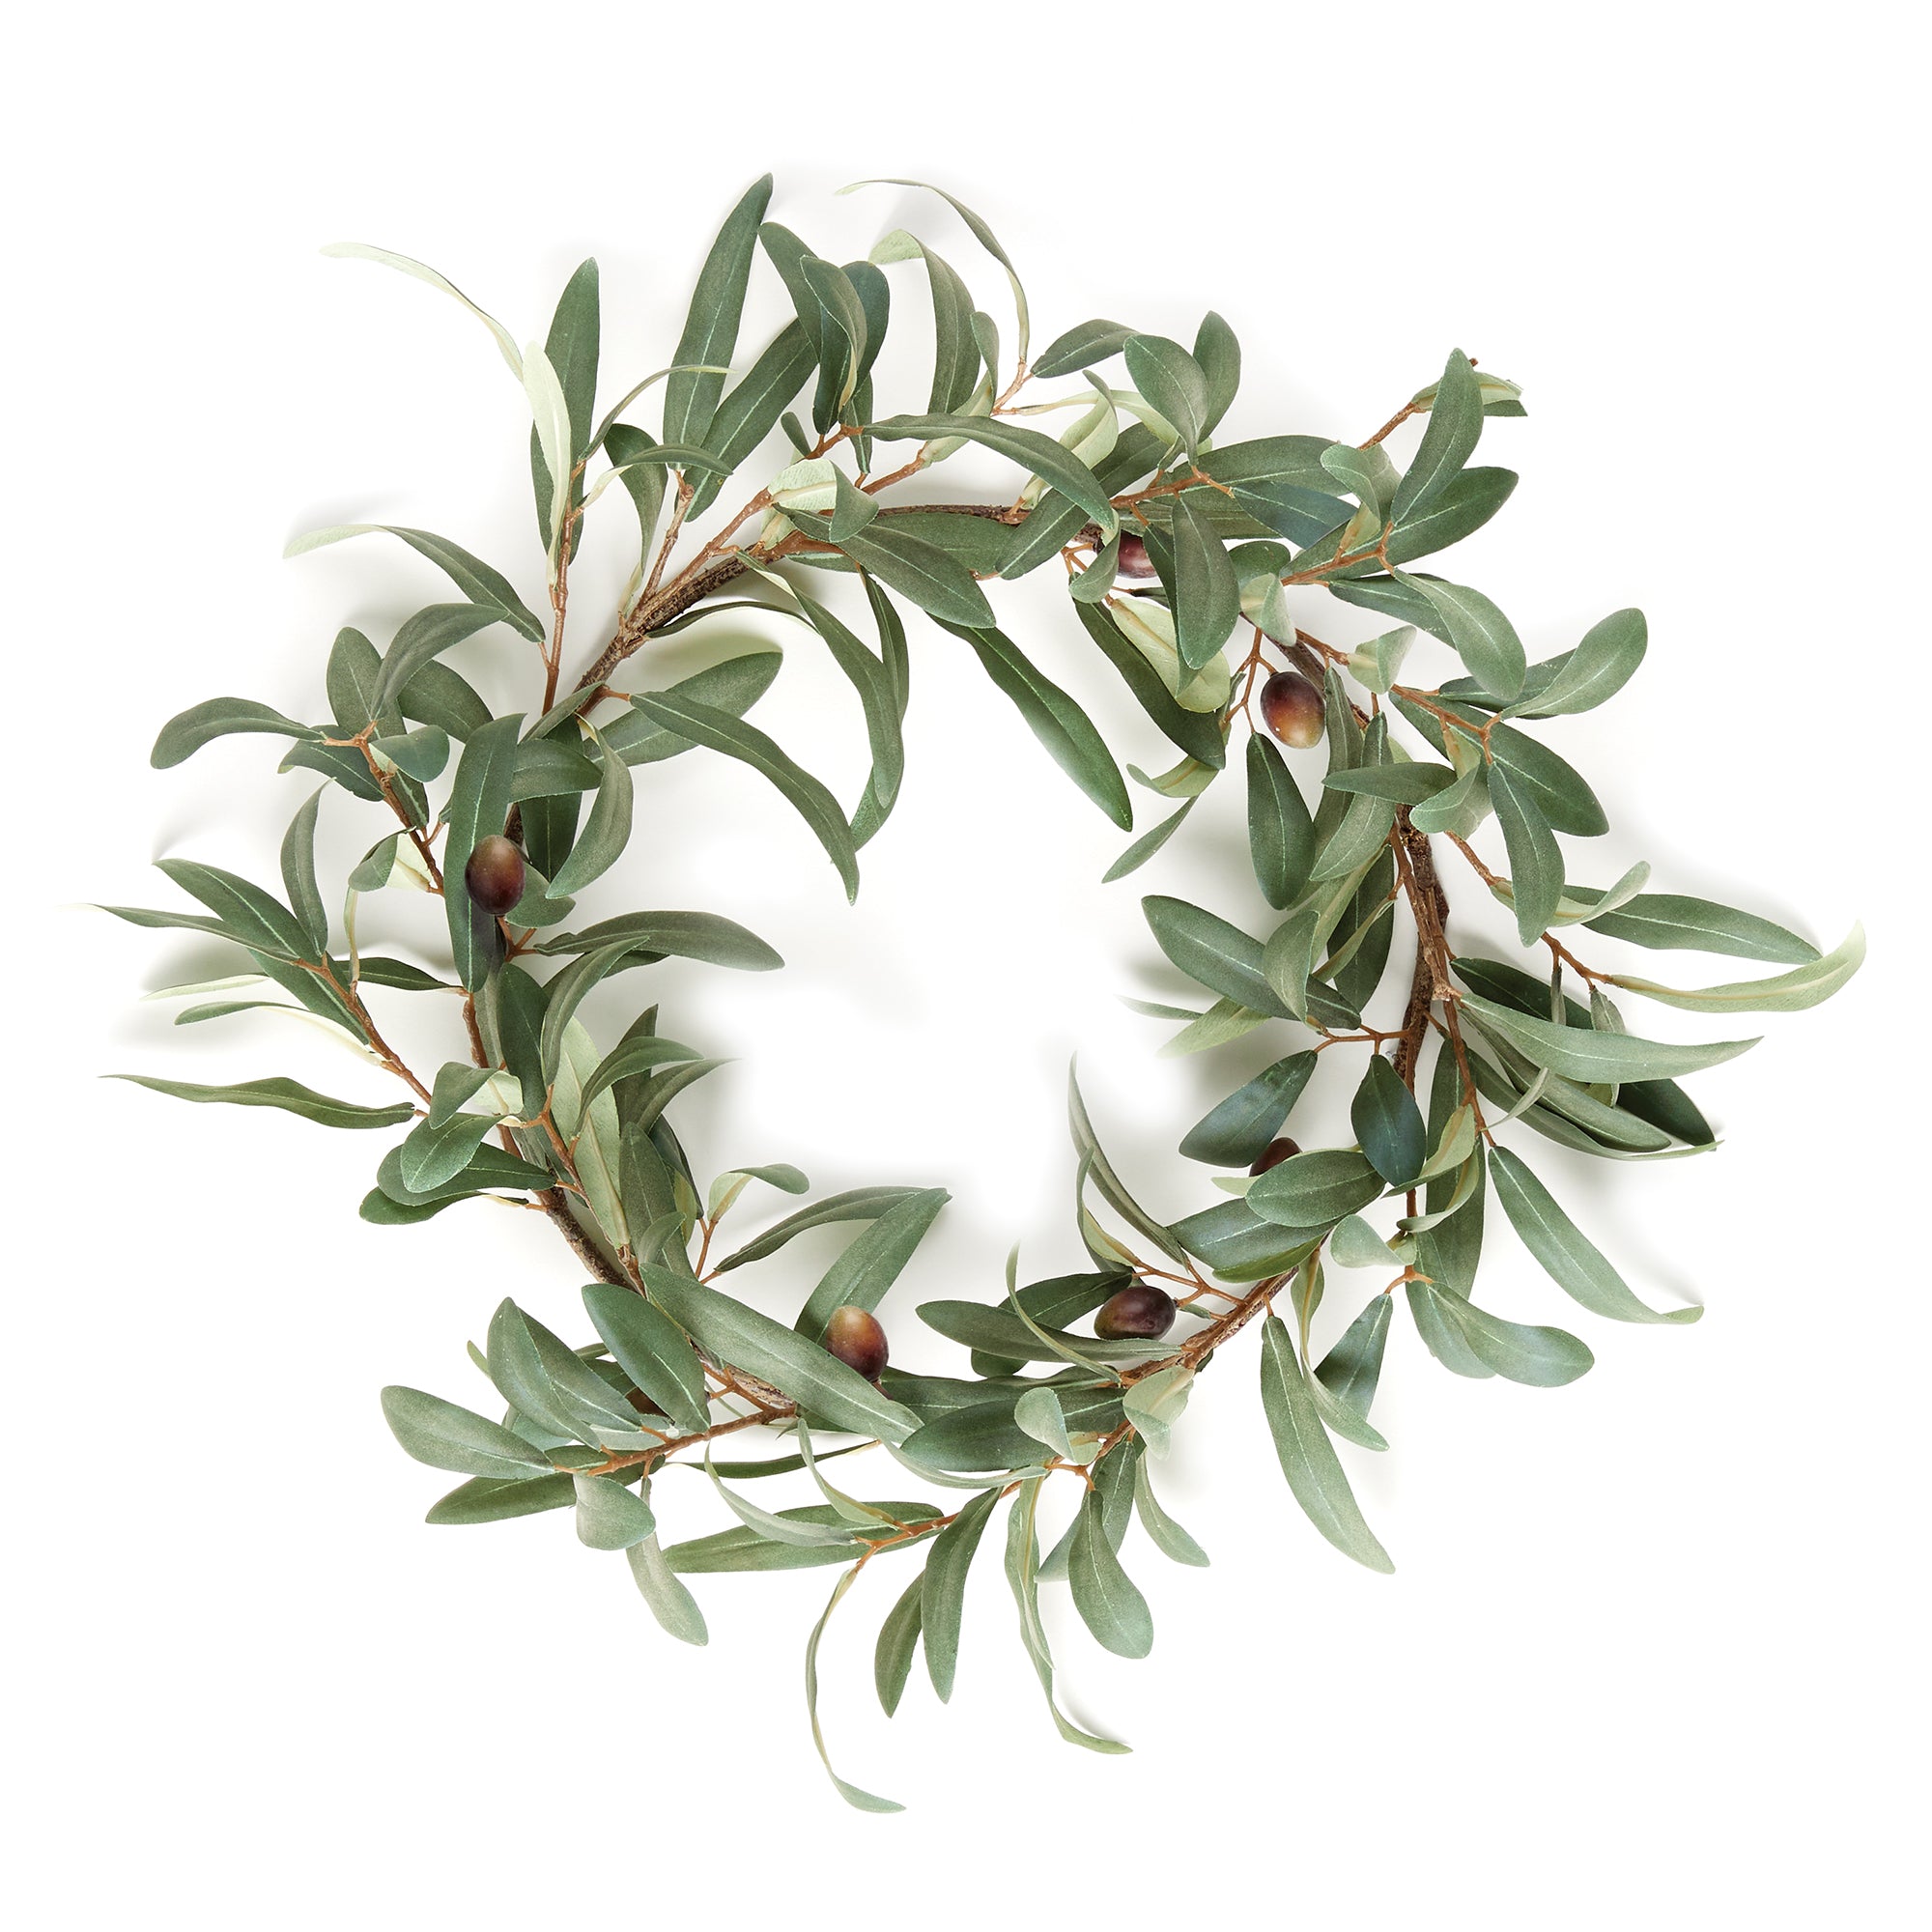 The olive wreath is a charming accent for any space needing a touch of warmth. Distinctive and refined, it's no wonder this Mediterranean beauty has stood the test of time. Amethyst Home provides interior design, new construction, custom furniture, and area rugs in the Miami metro area.